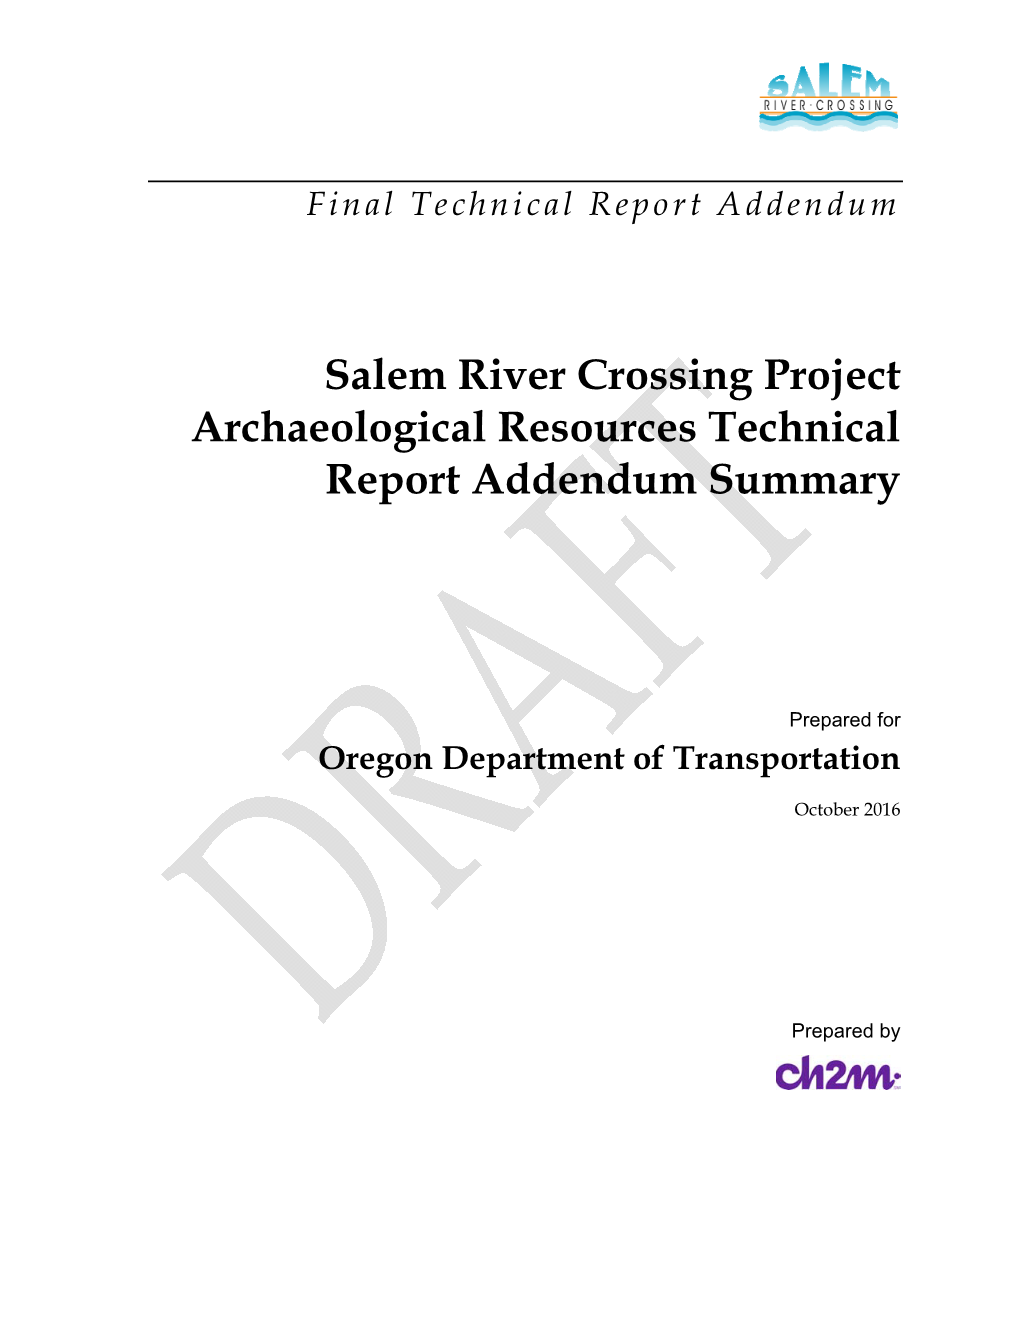 Salem River Crossing Project Archaeological Resources Technical Report Addendum Summary